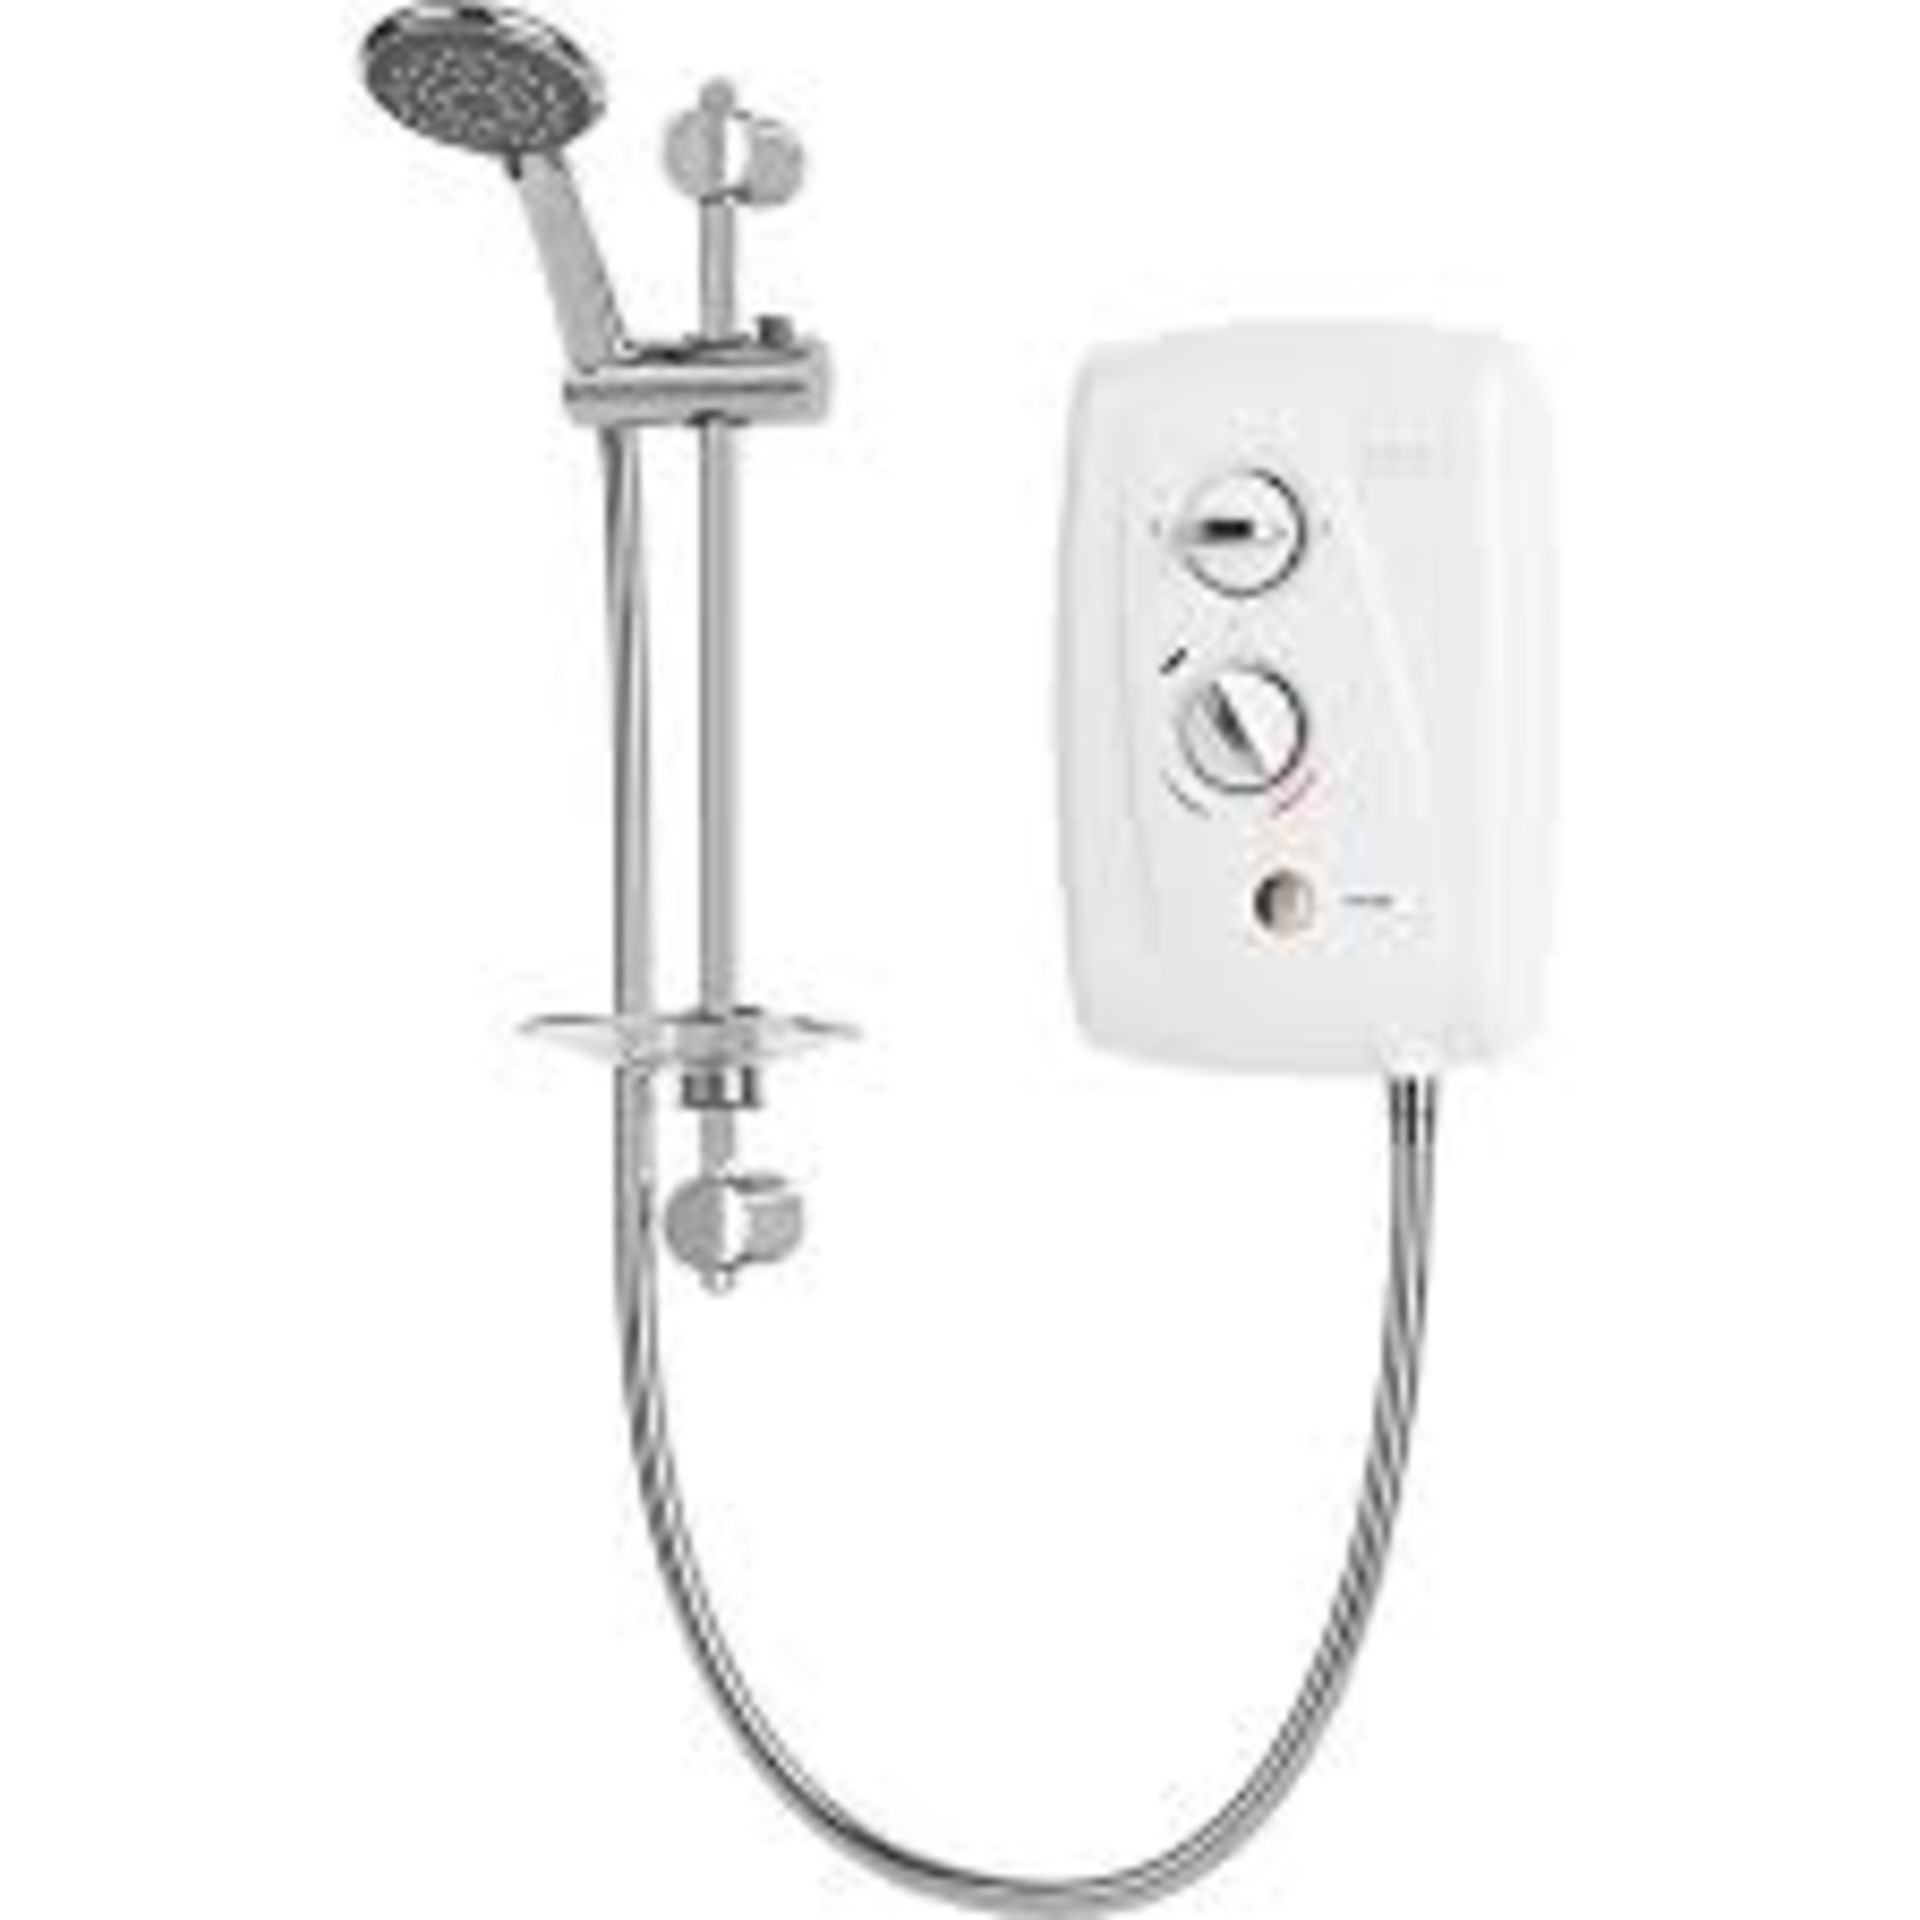 Triton T80 Easi-Fit+ White Manual Electric Shower, 9.5kW - ER51. . The T80 East-Fit+ is a great